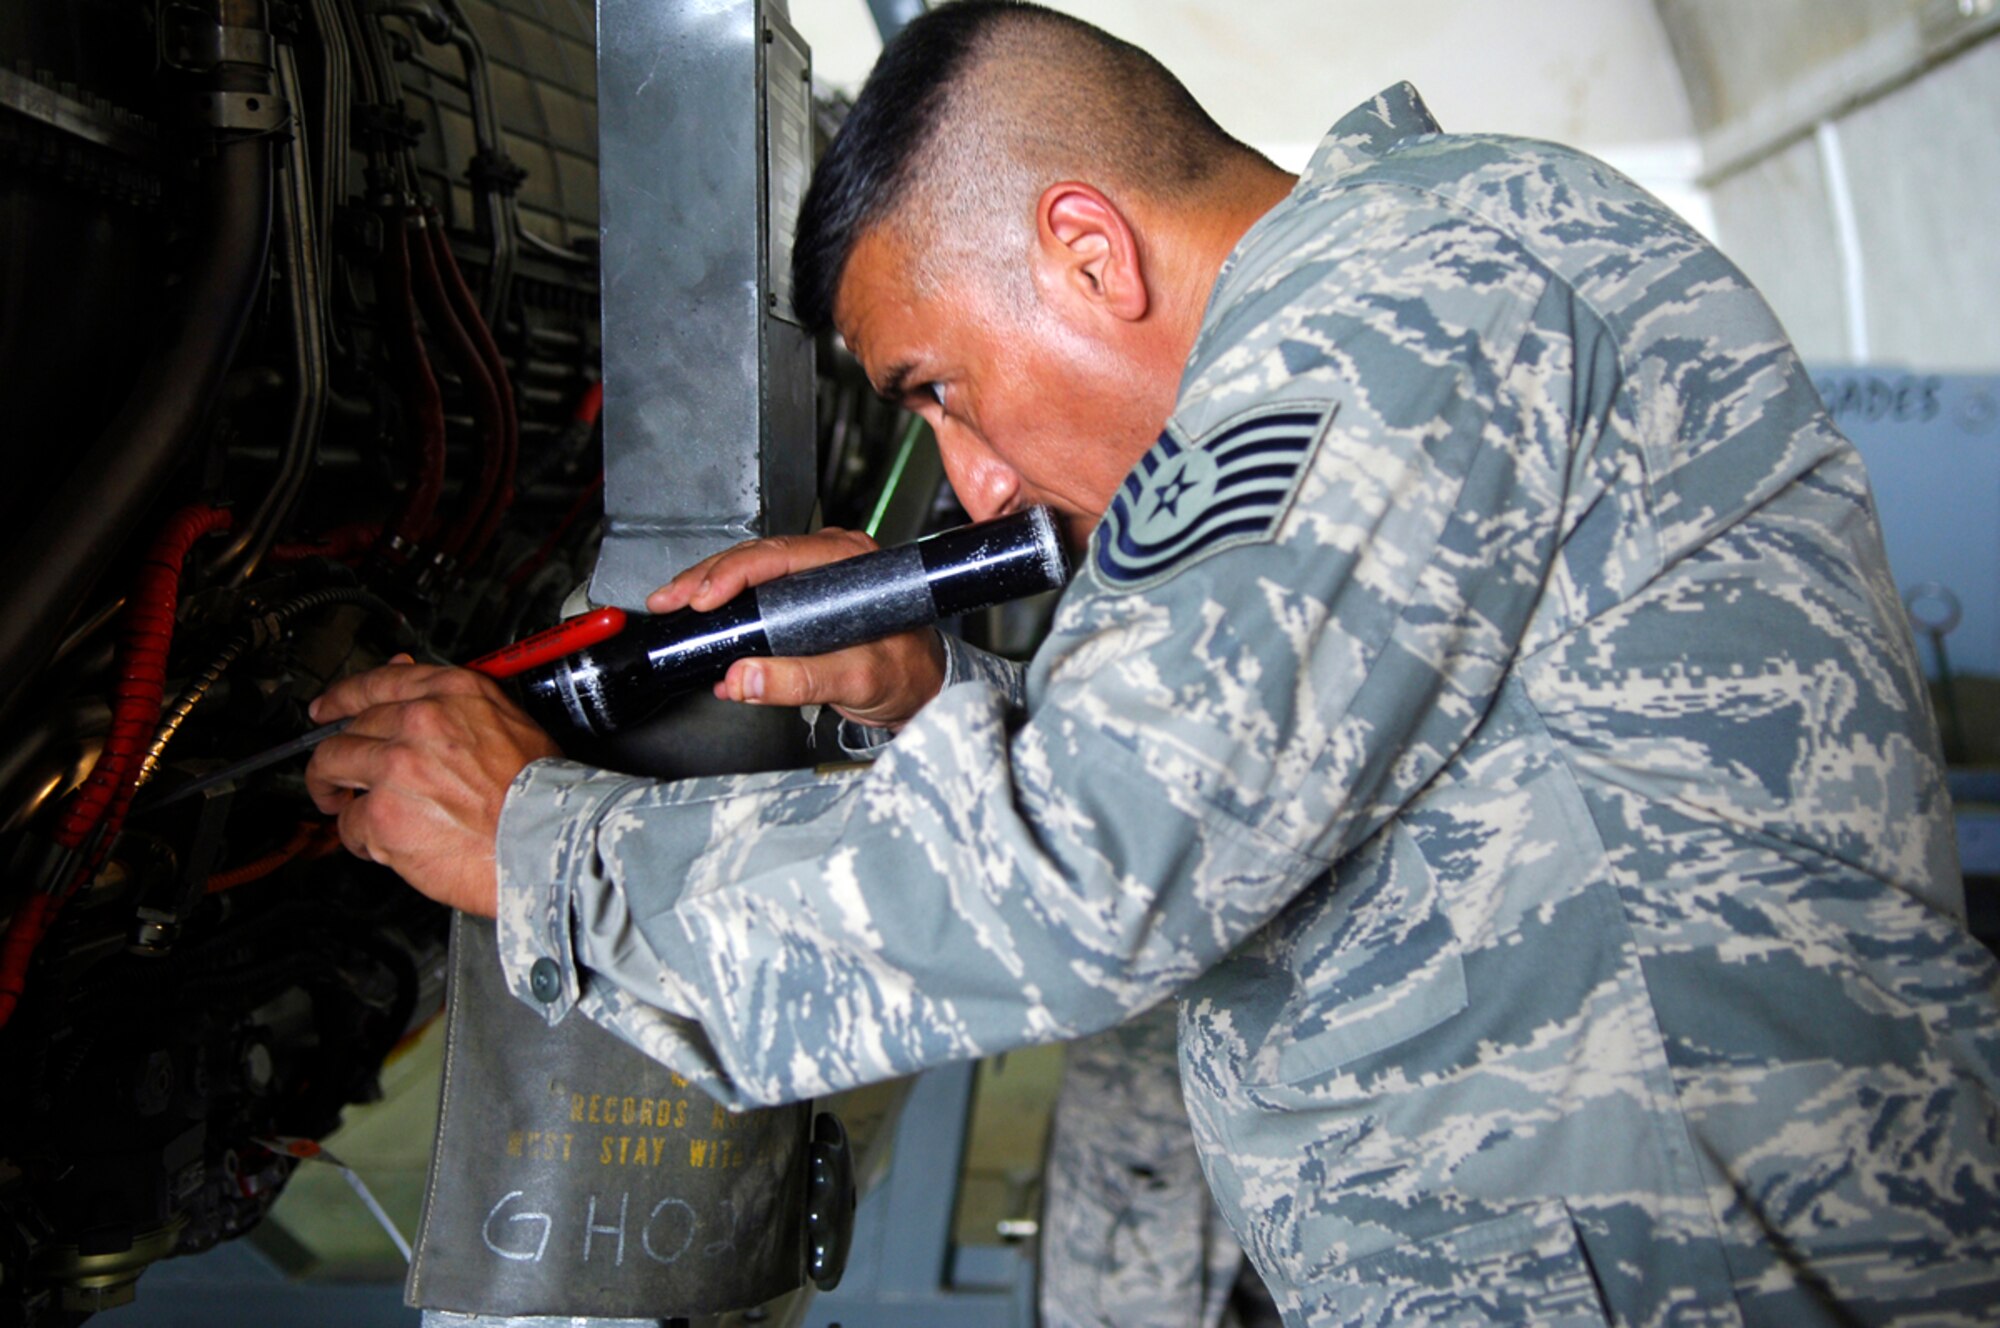 JOINT BASE BALAD, Iraq -- Tech. Sgt. Juan Ramon, a 332nd Expeditionary Maintenance Squadron engine mechanic, performs a pre-installation inspection on a GE F110-100 jet engine here July 7. The engines are downloaded from the aircraft on a regular basis to check for any wear and tear on the components. Sergeant Ramon is deployed from the New York Air National Guard. (U.S. Air Force photo/Staff Sgt. Mareshah Haynes)